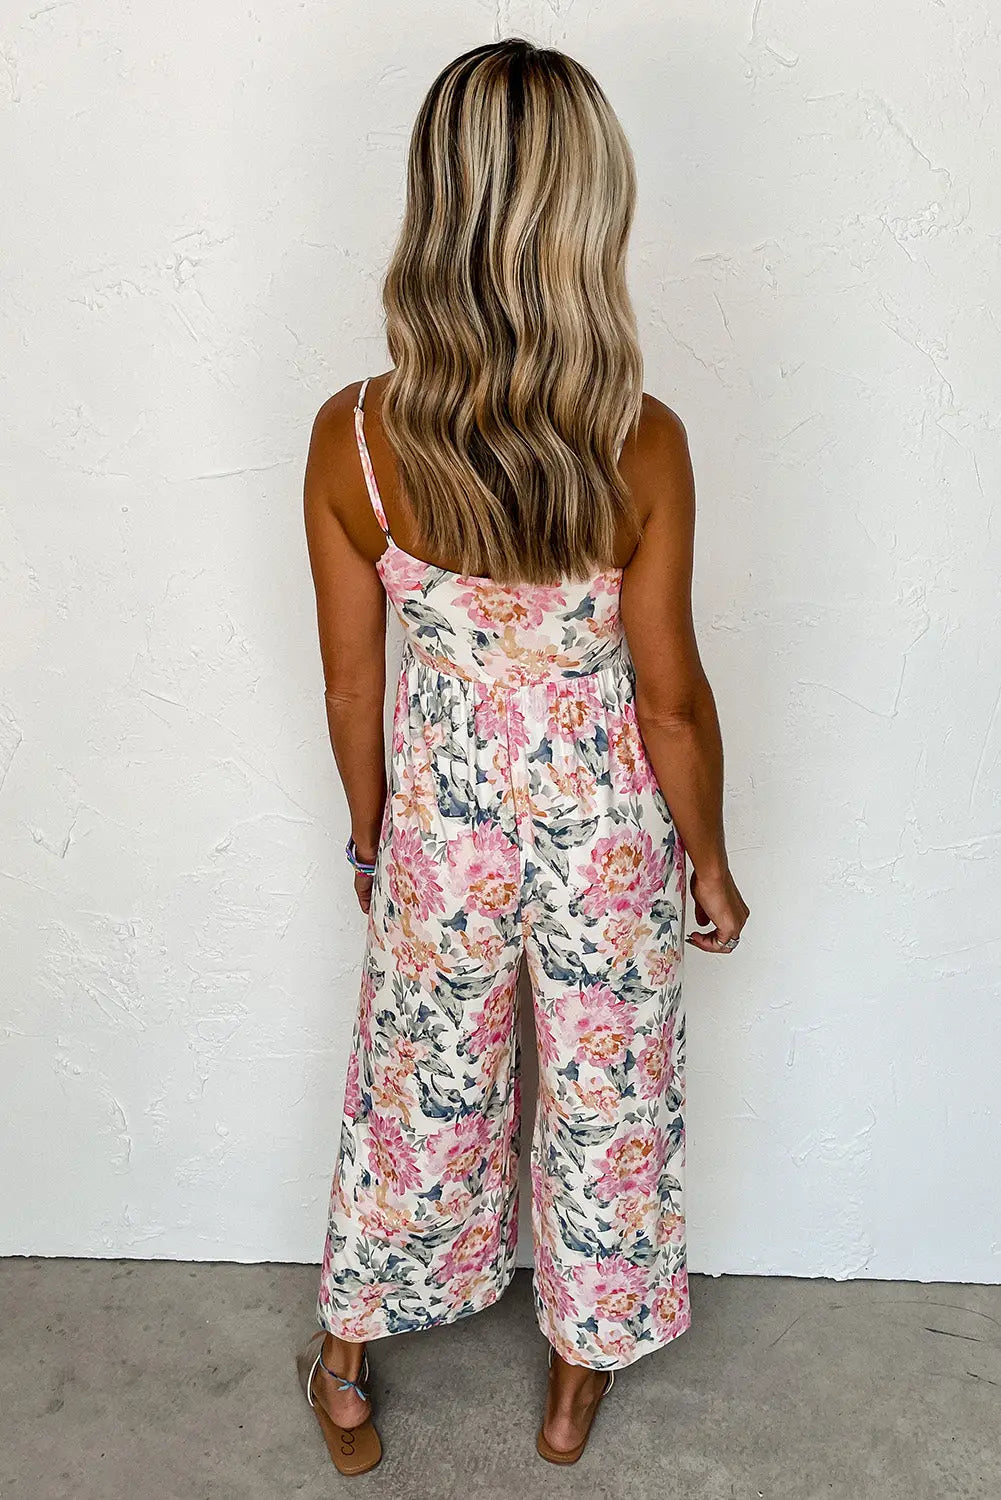 White floral spaghetti straps wide leg jumpsuit - jumpsuits & rompers